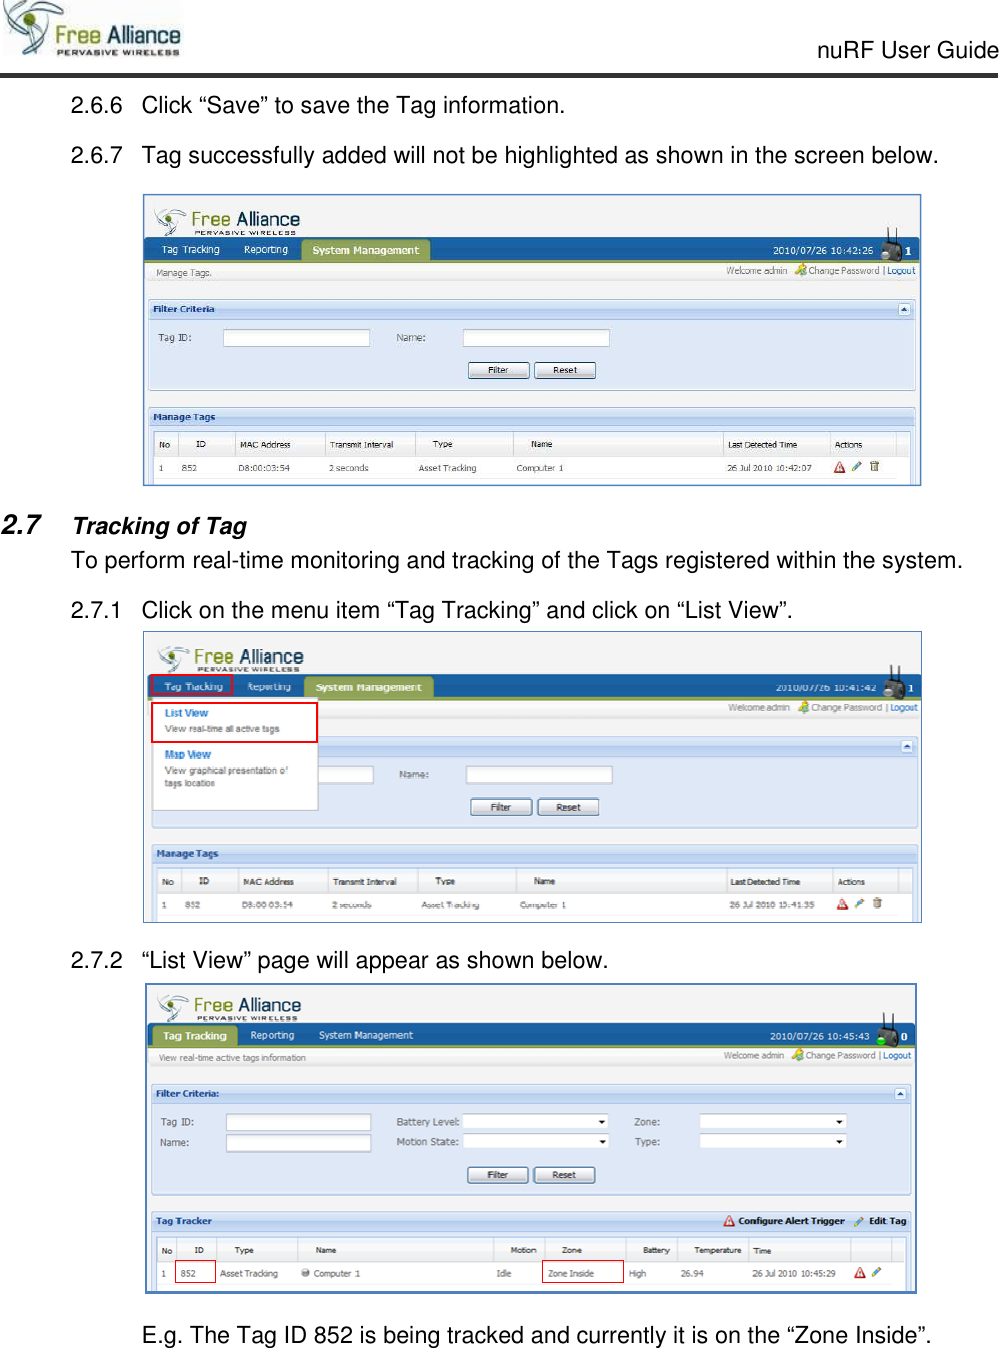     nuRF User Guide                                                                                                   2.6.6  Click “Save” to save the Tag information. 2.6.7  Tag successfully added will not be highlighted as shown in the screen below.   2.7 Tracking of Tag To perform real-time monitoring and tracking of the Tags registered within the system. 2.7.1  Click on the menu item “Tag Tracking” and click on “List View”.  2.7.2  “List View” page will appear as shown below.   E.g. The Tag ID 852 is being tracked and currently it is on the “Zone Inside”.     